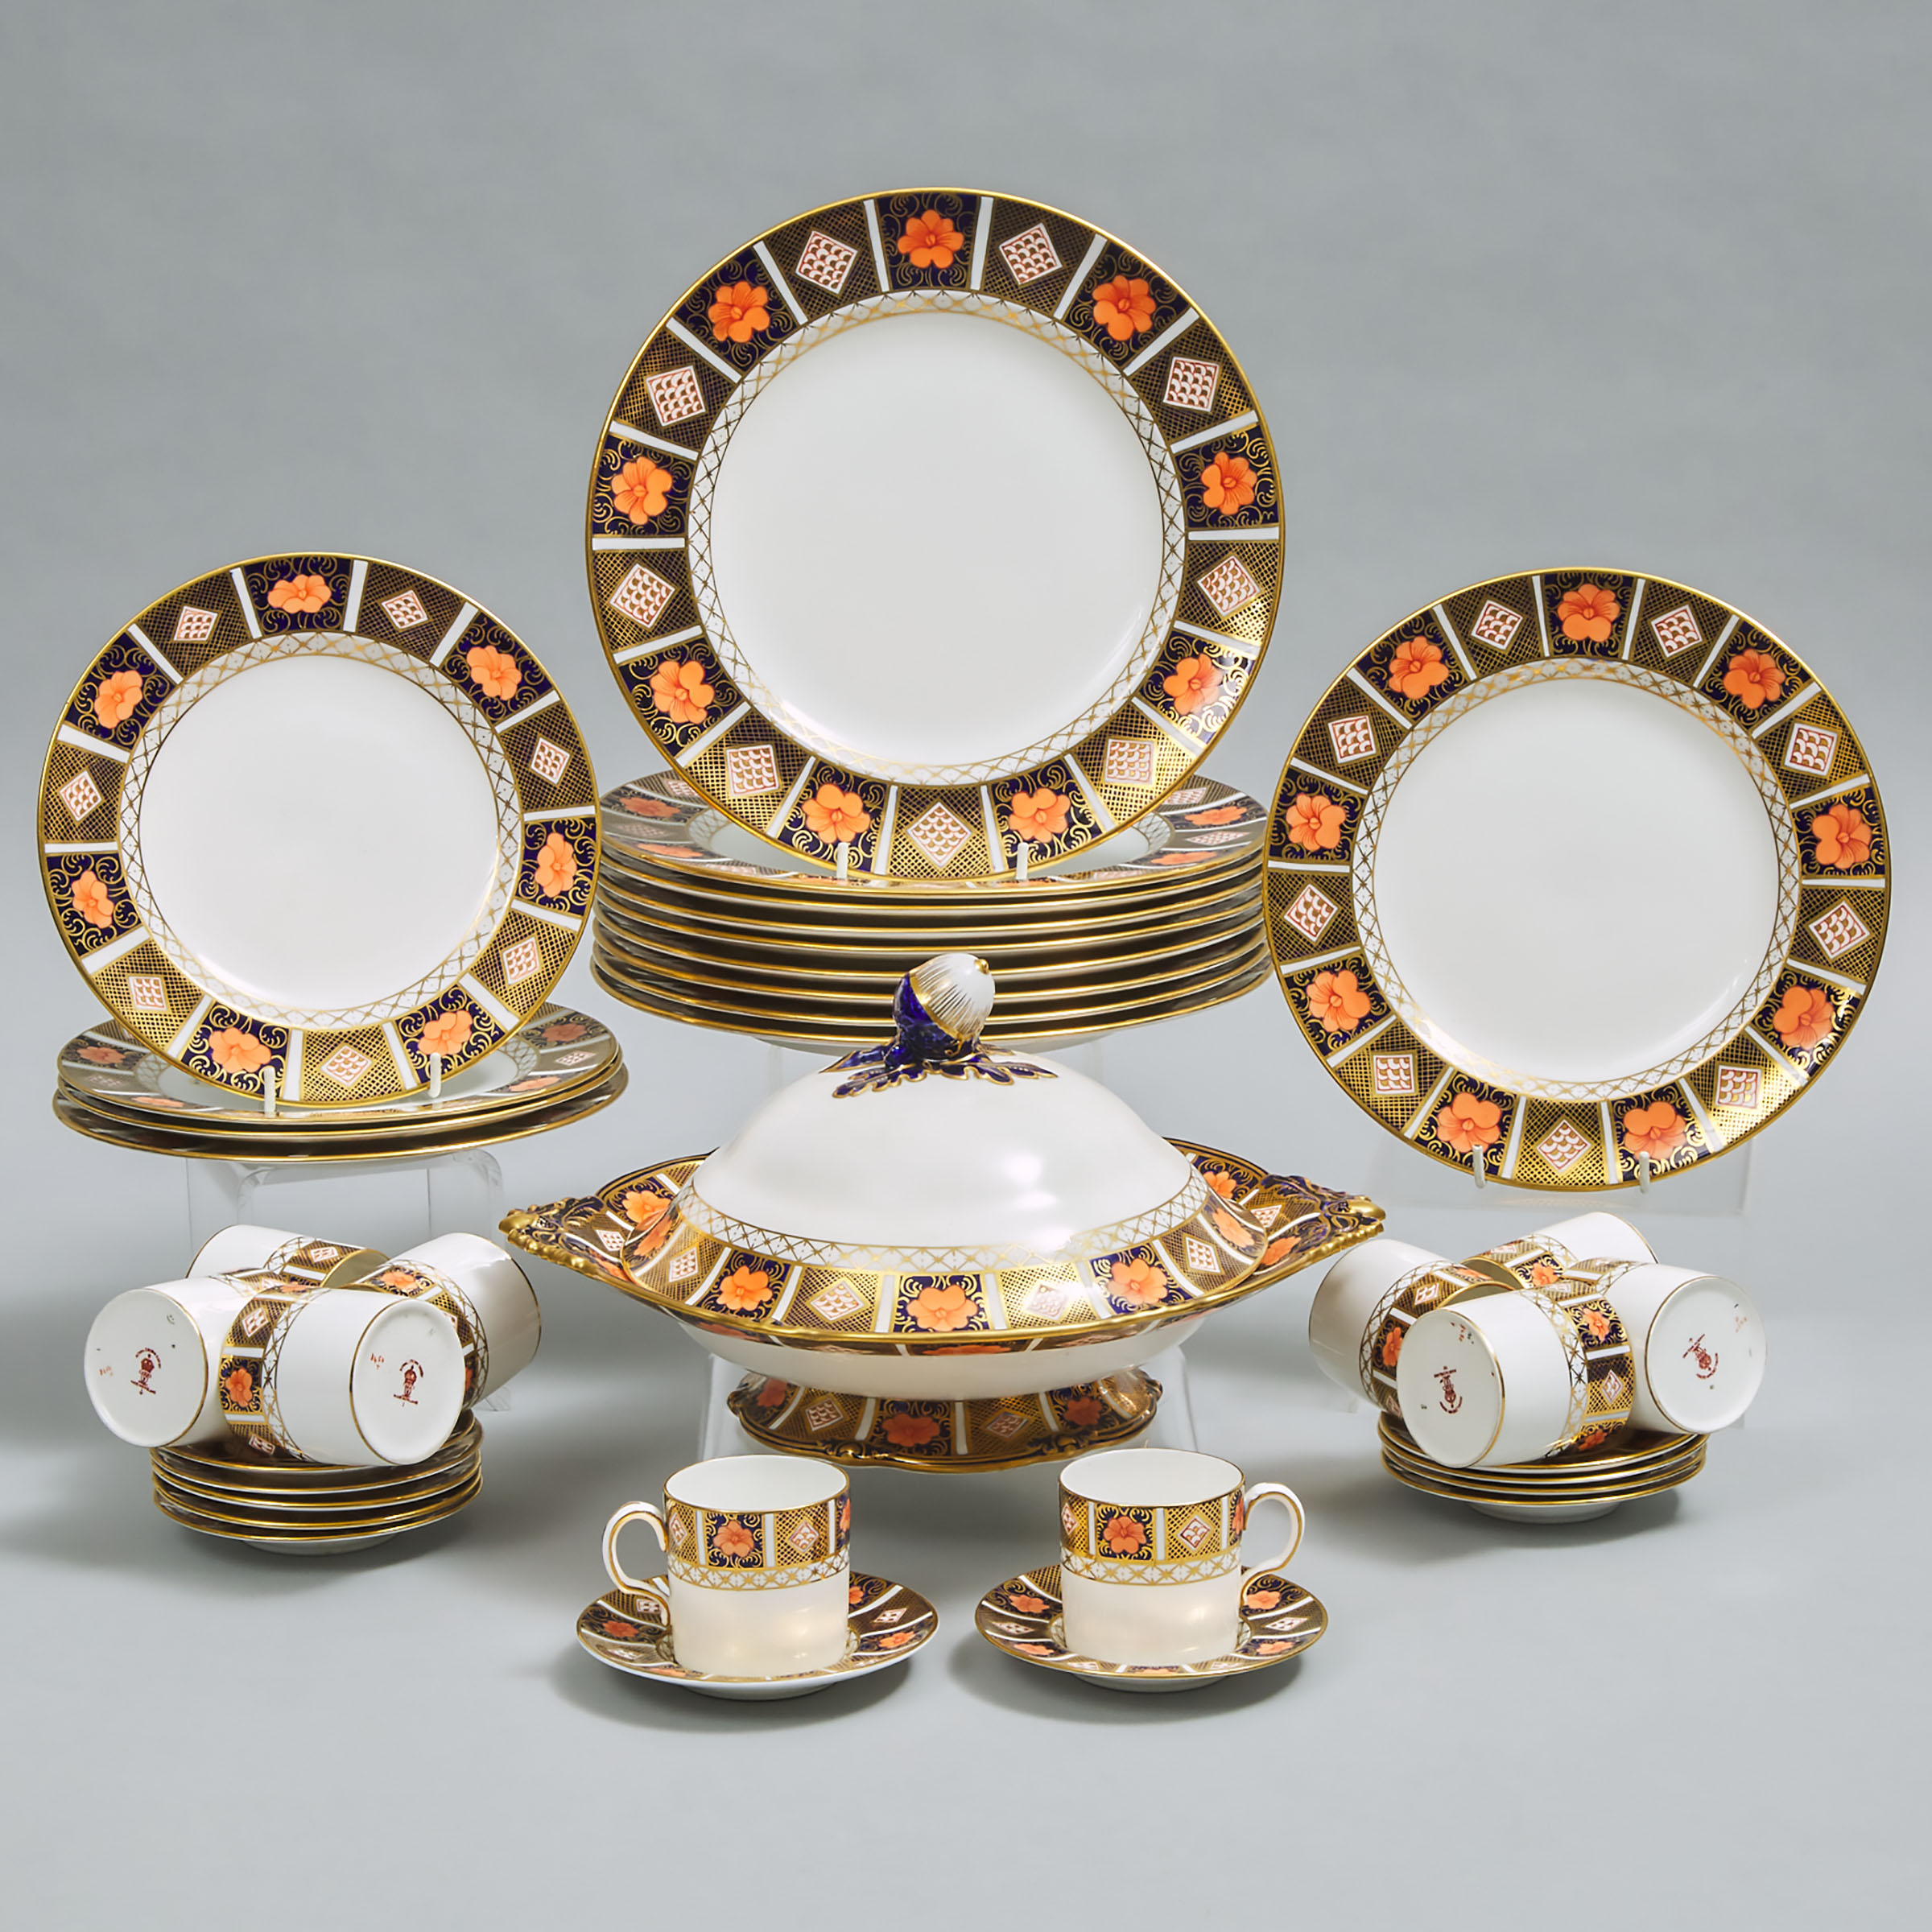 Royal Crown Derby 'Imari' (8450 and 9011) Pattern Service, 20th century